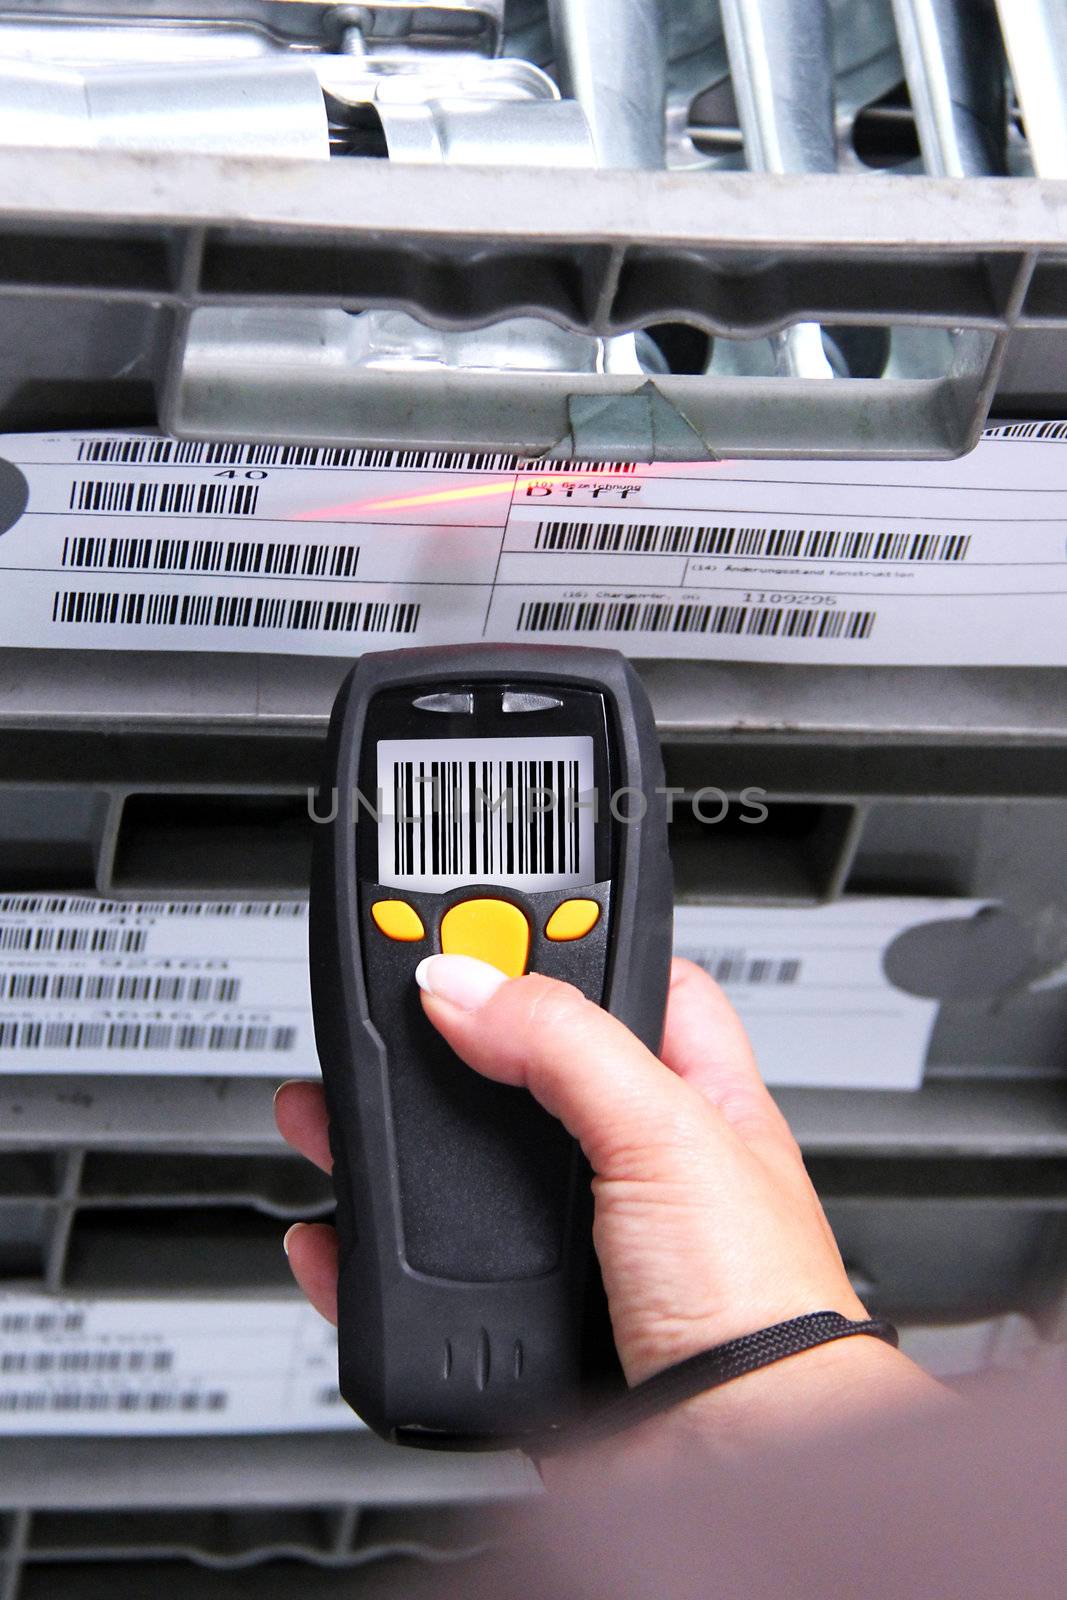 Handheld Computer for barcode scanning identification